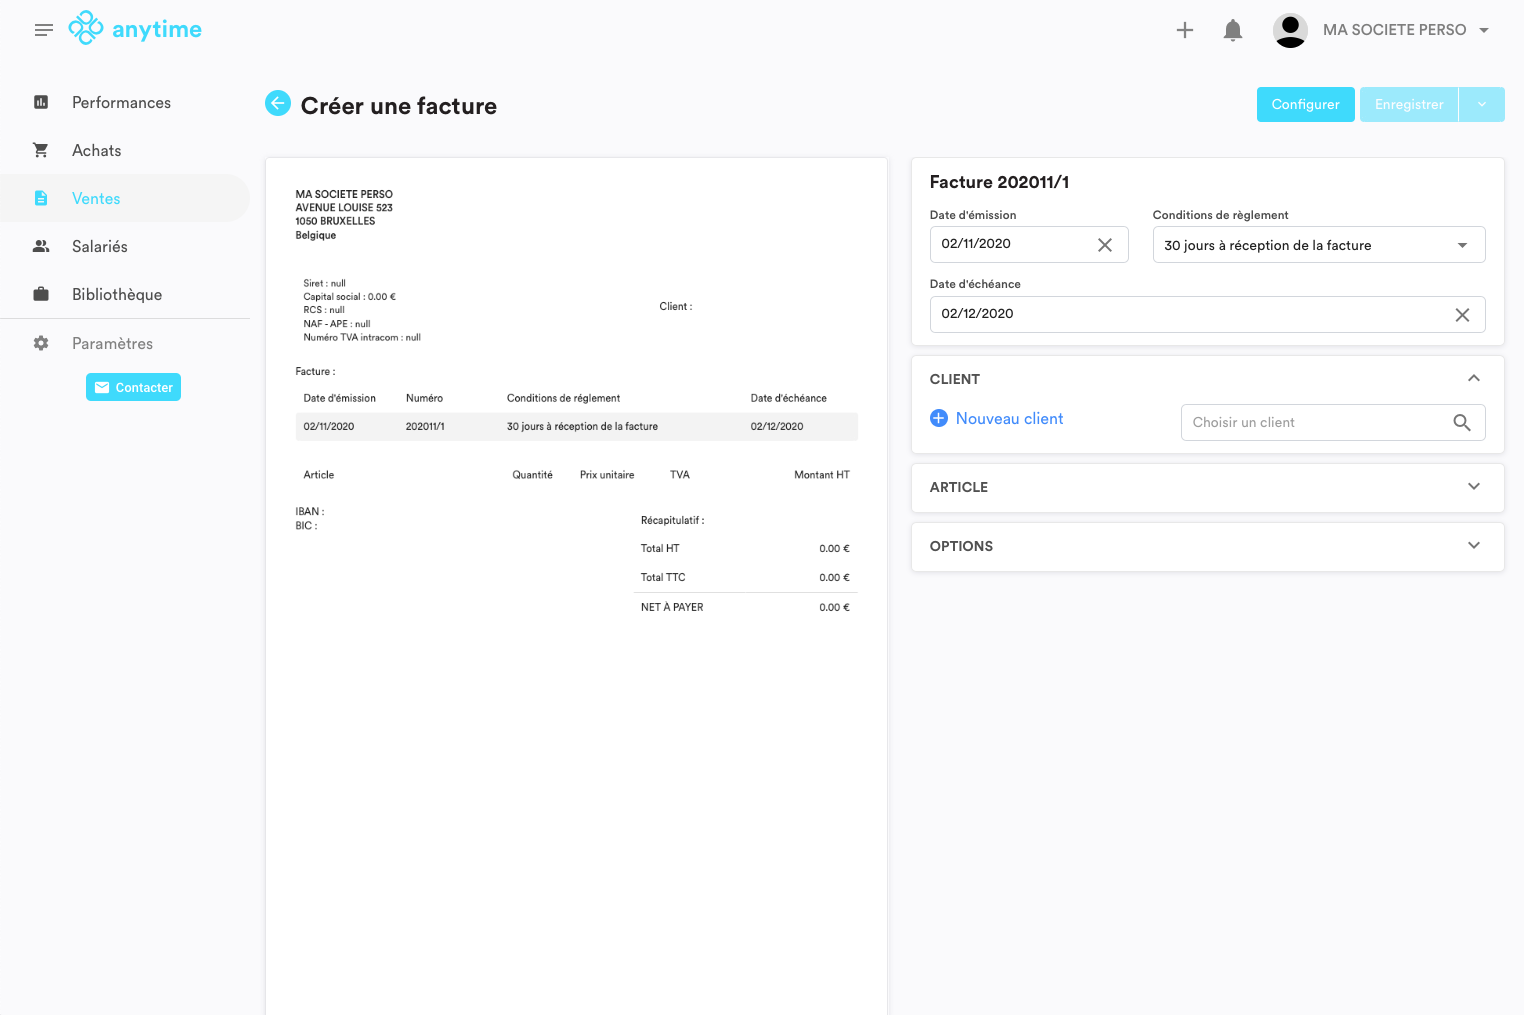 Creating an invoice with Anytime is simple and intuitive